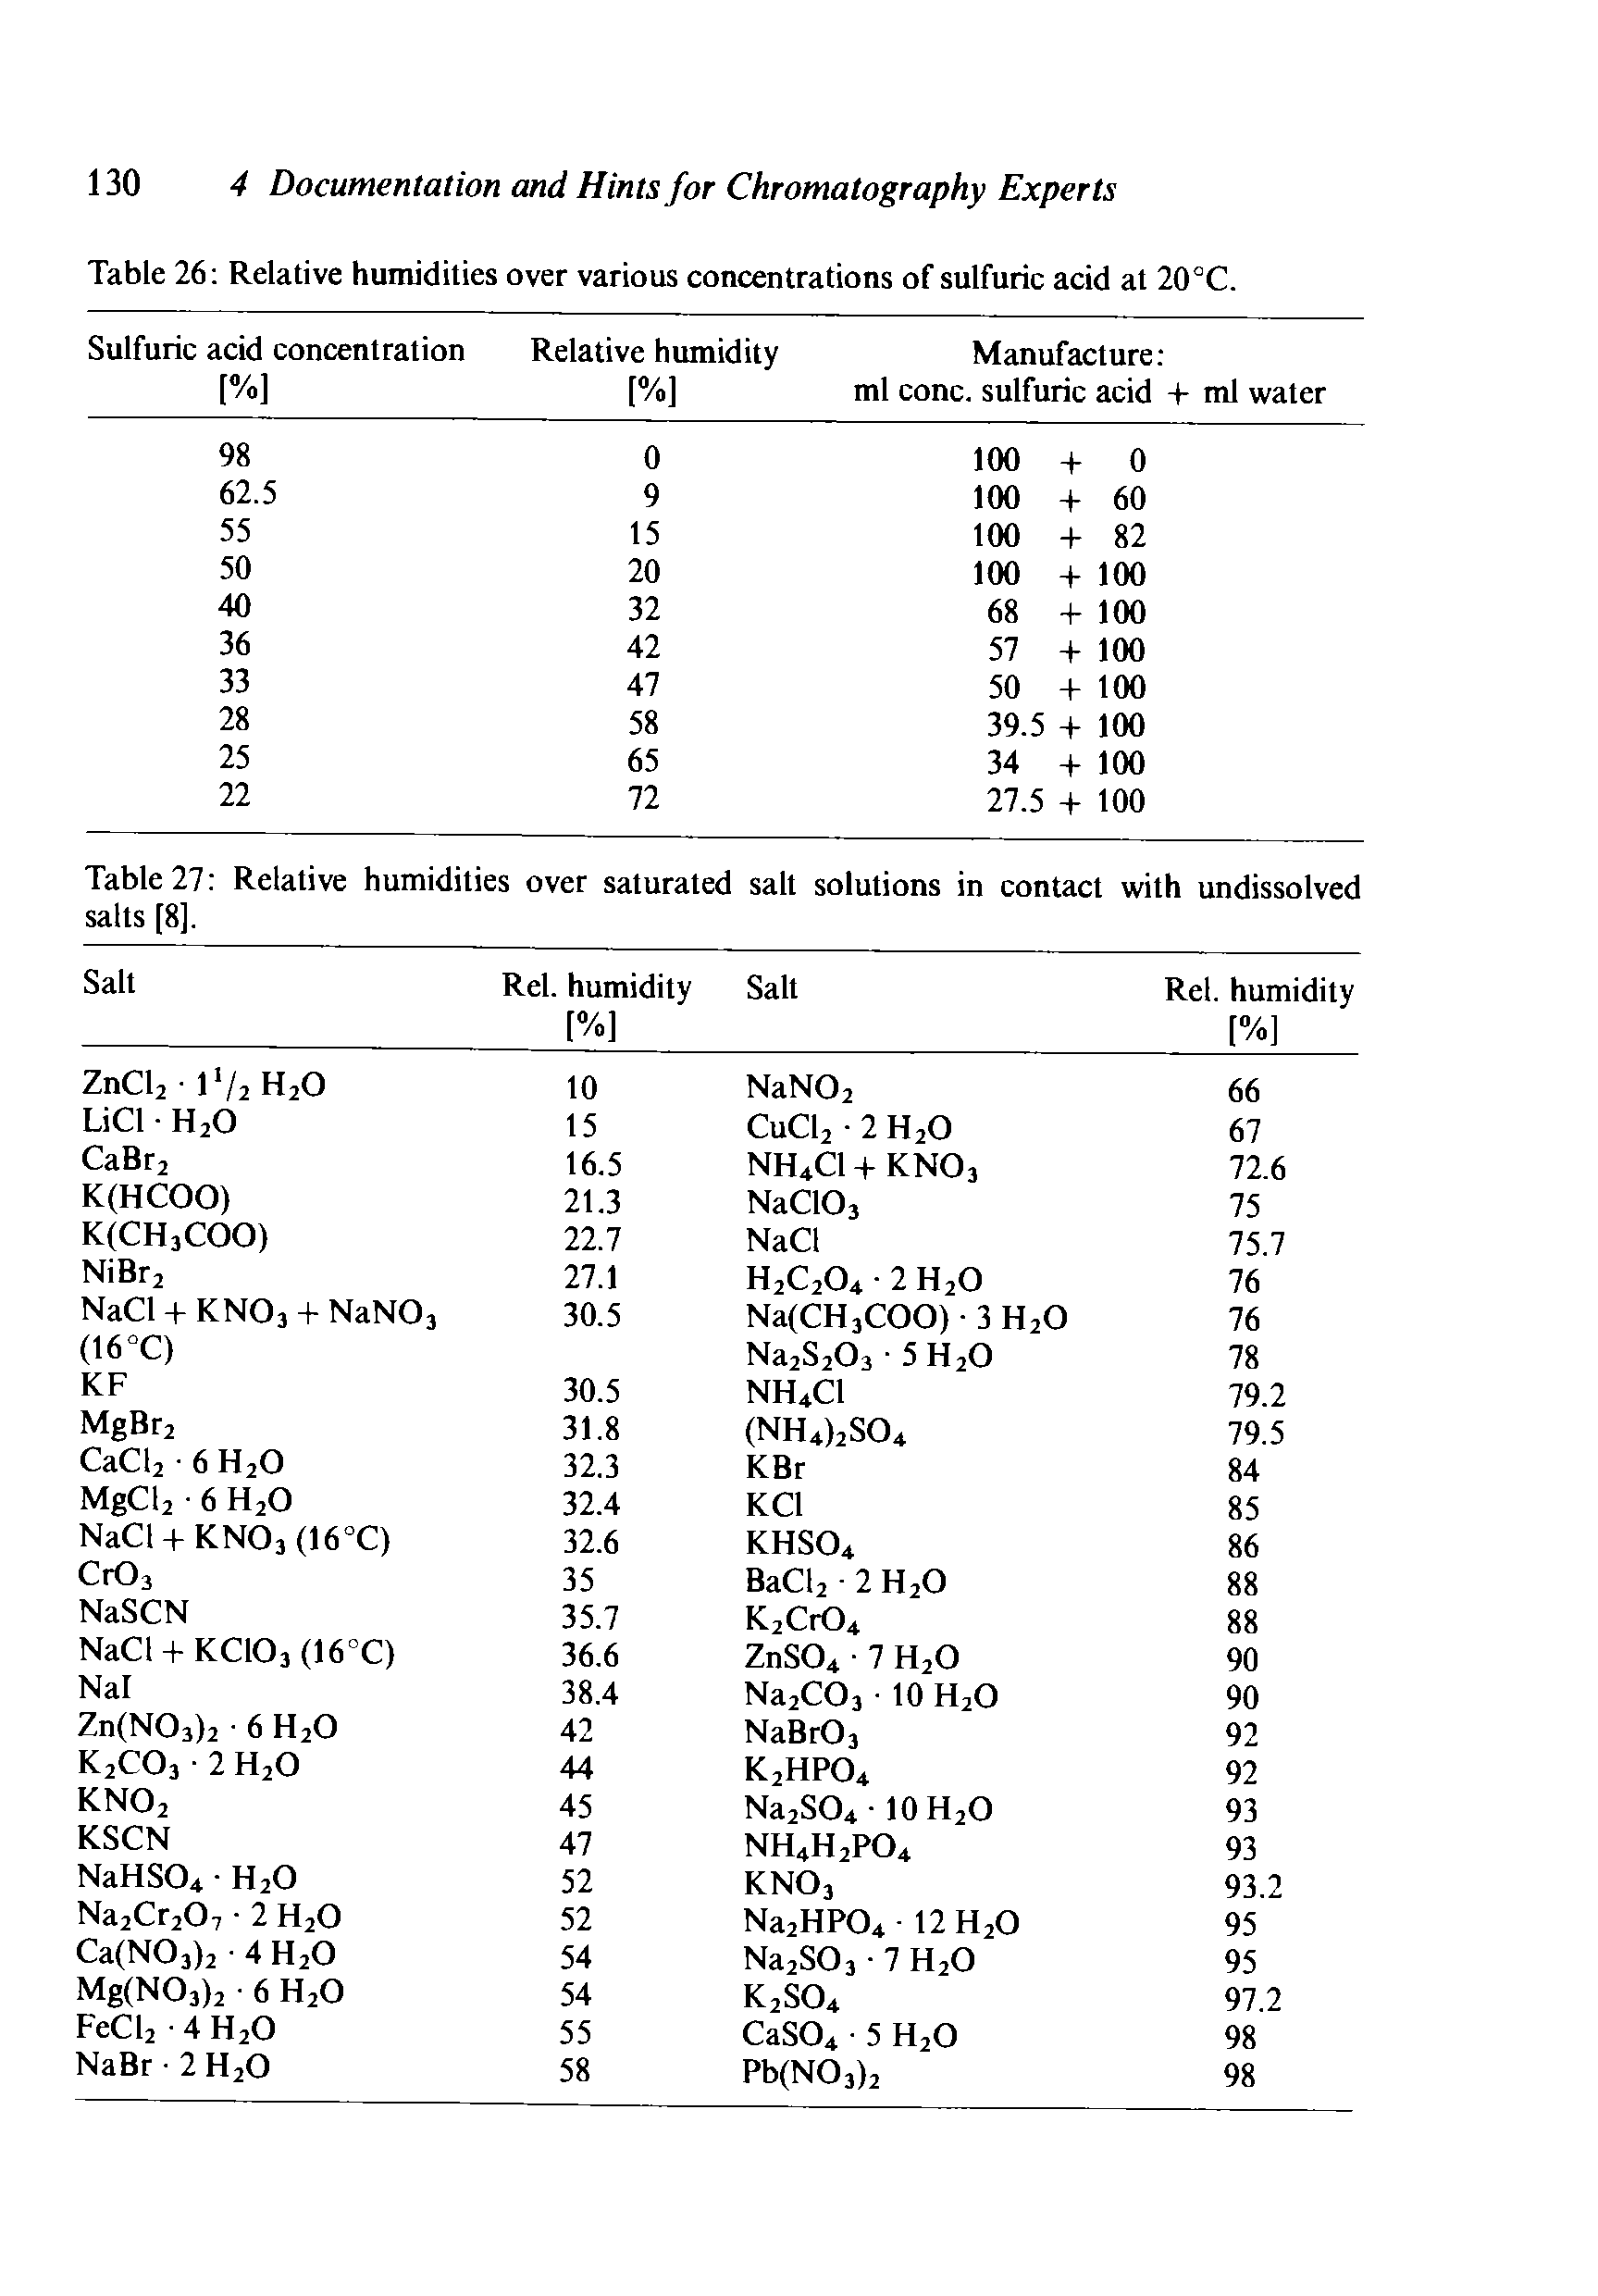 Table 26 Relative humidities over various concentrations of sulfuric acid at 20°C.